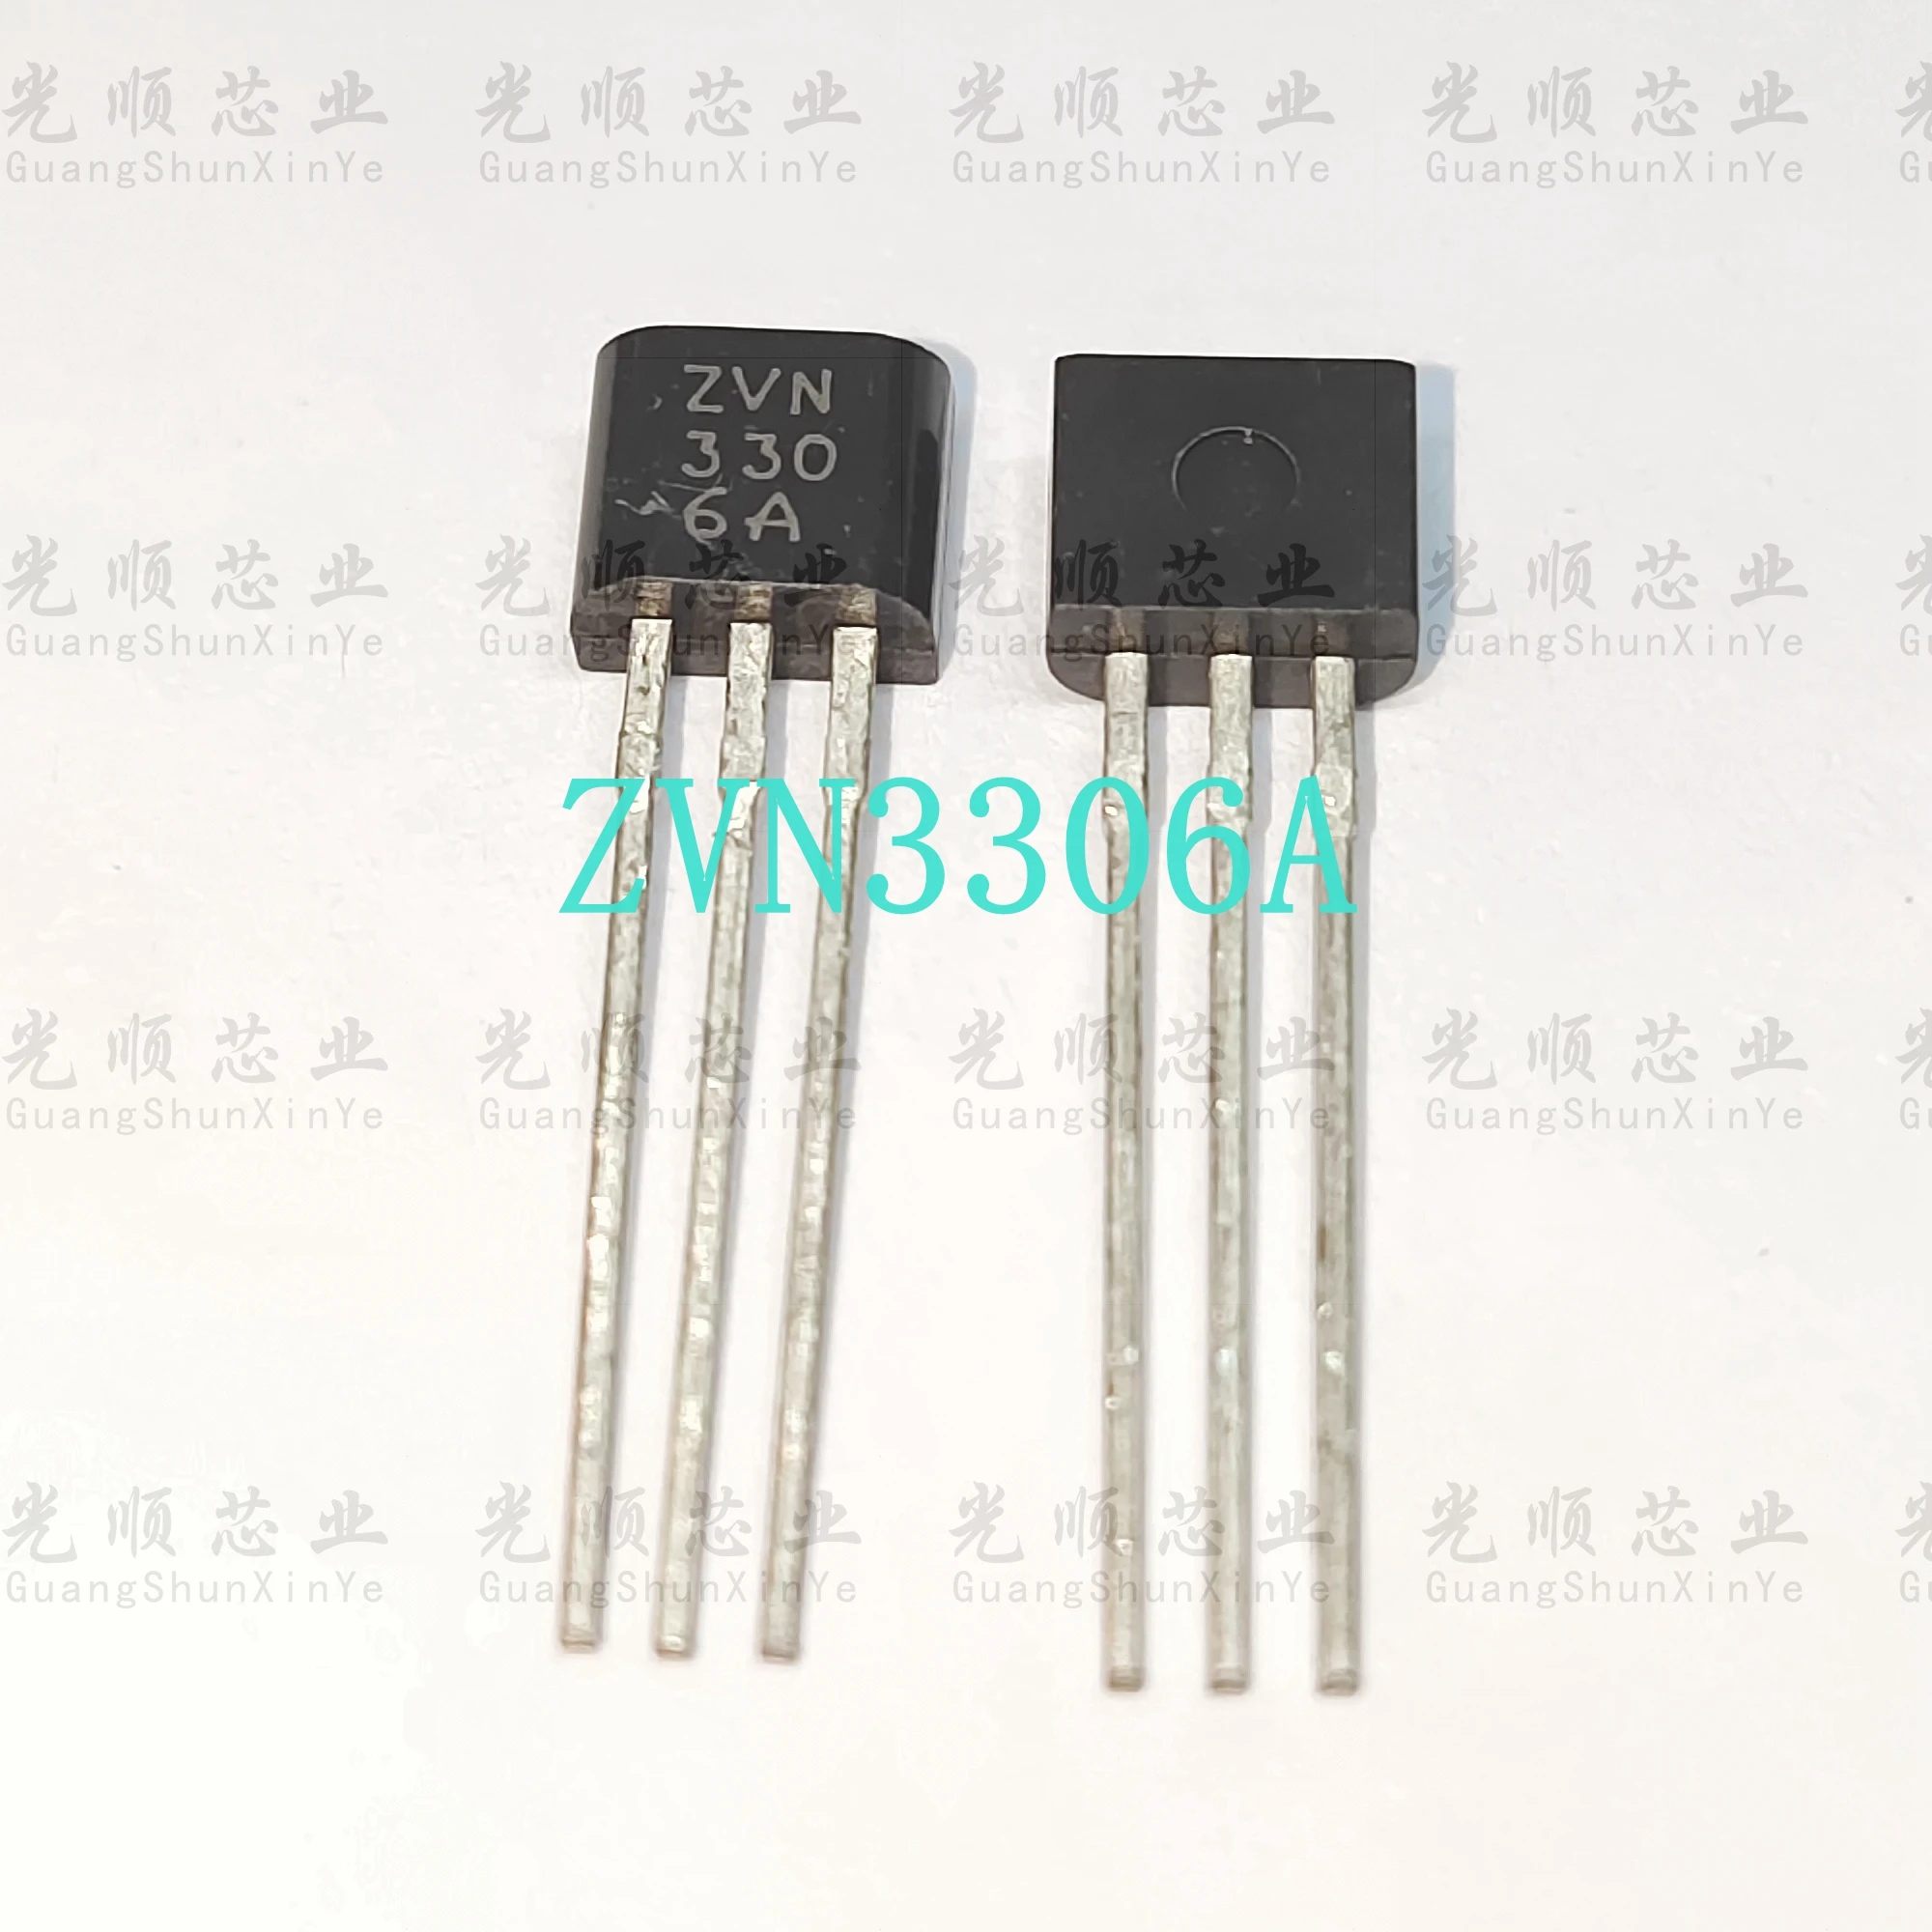 5PCS ZVN3306A TO92 INSTOCK